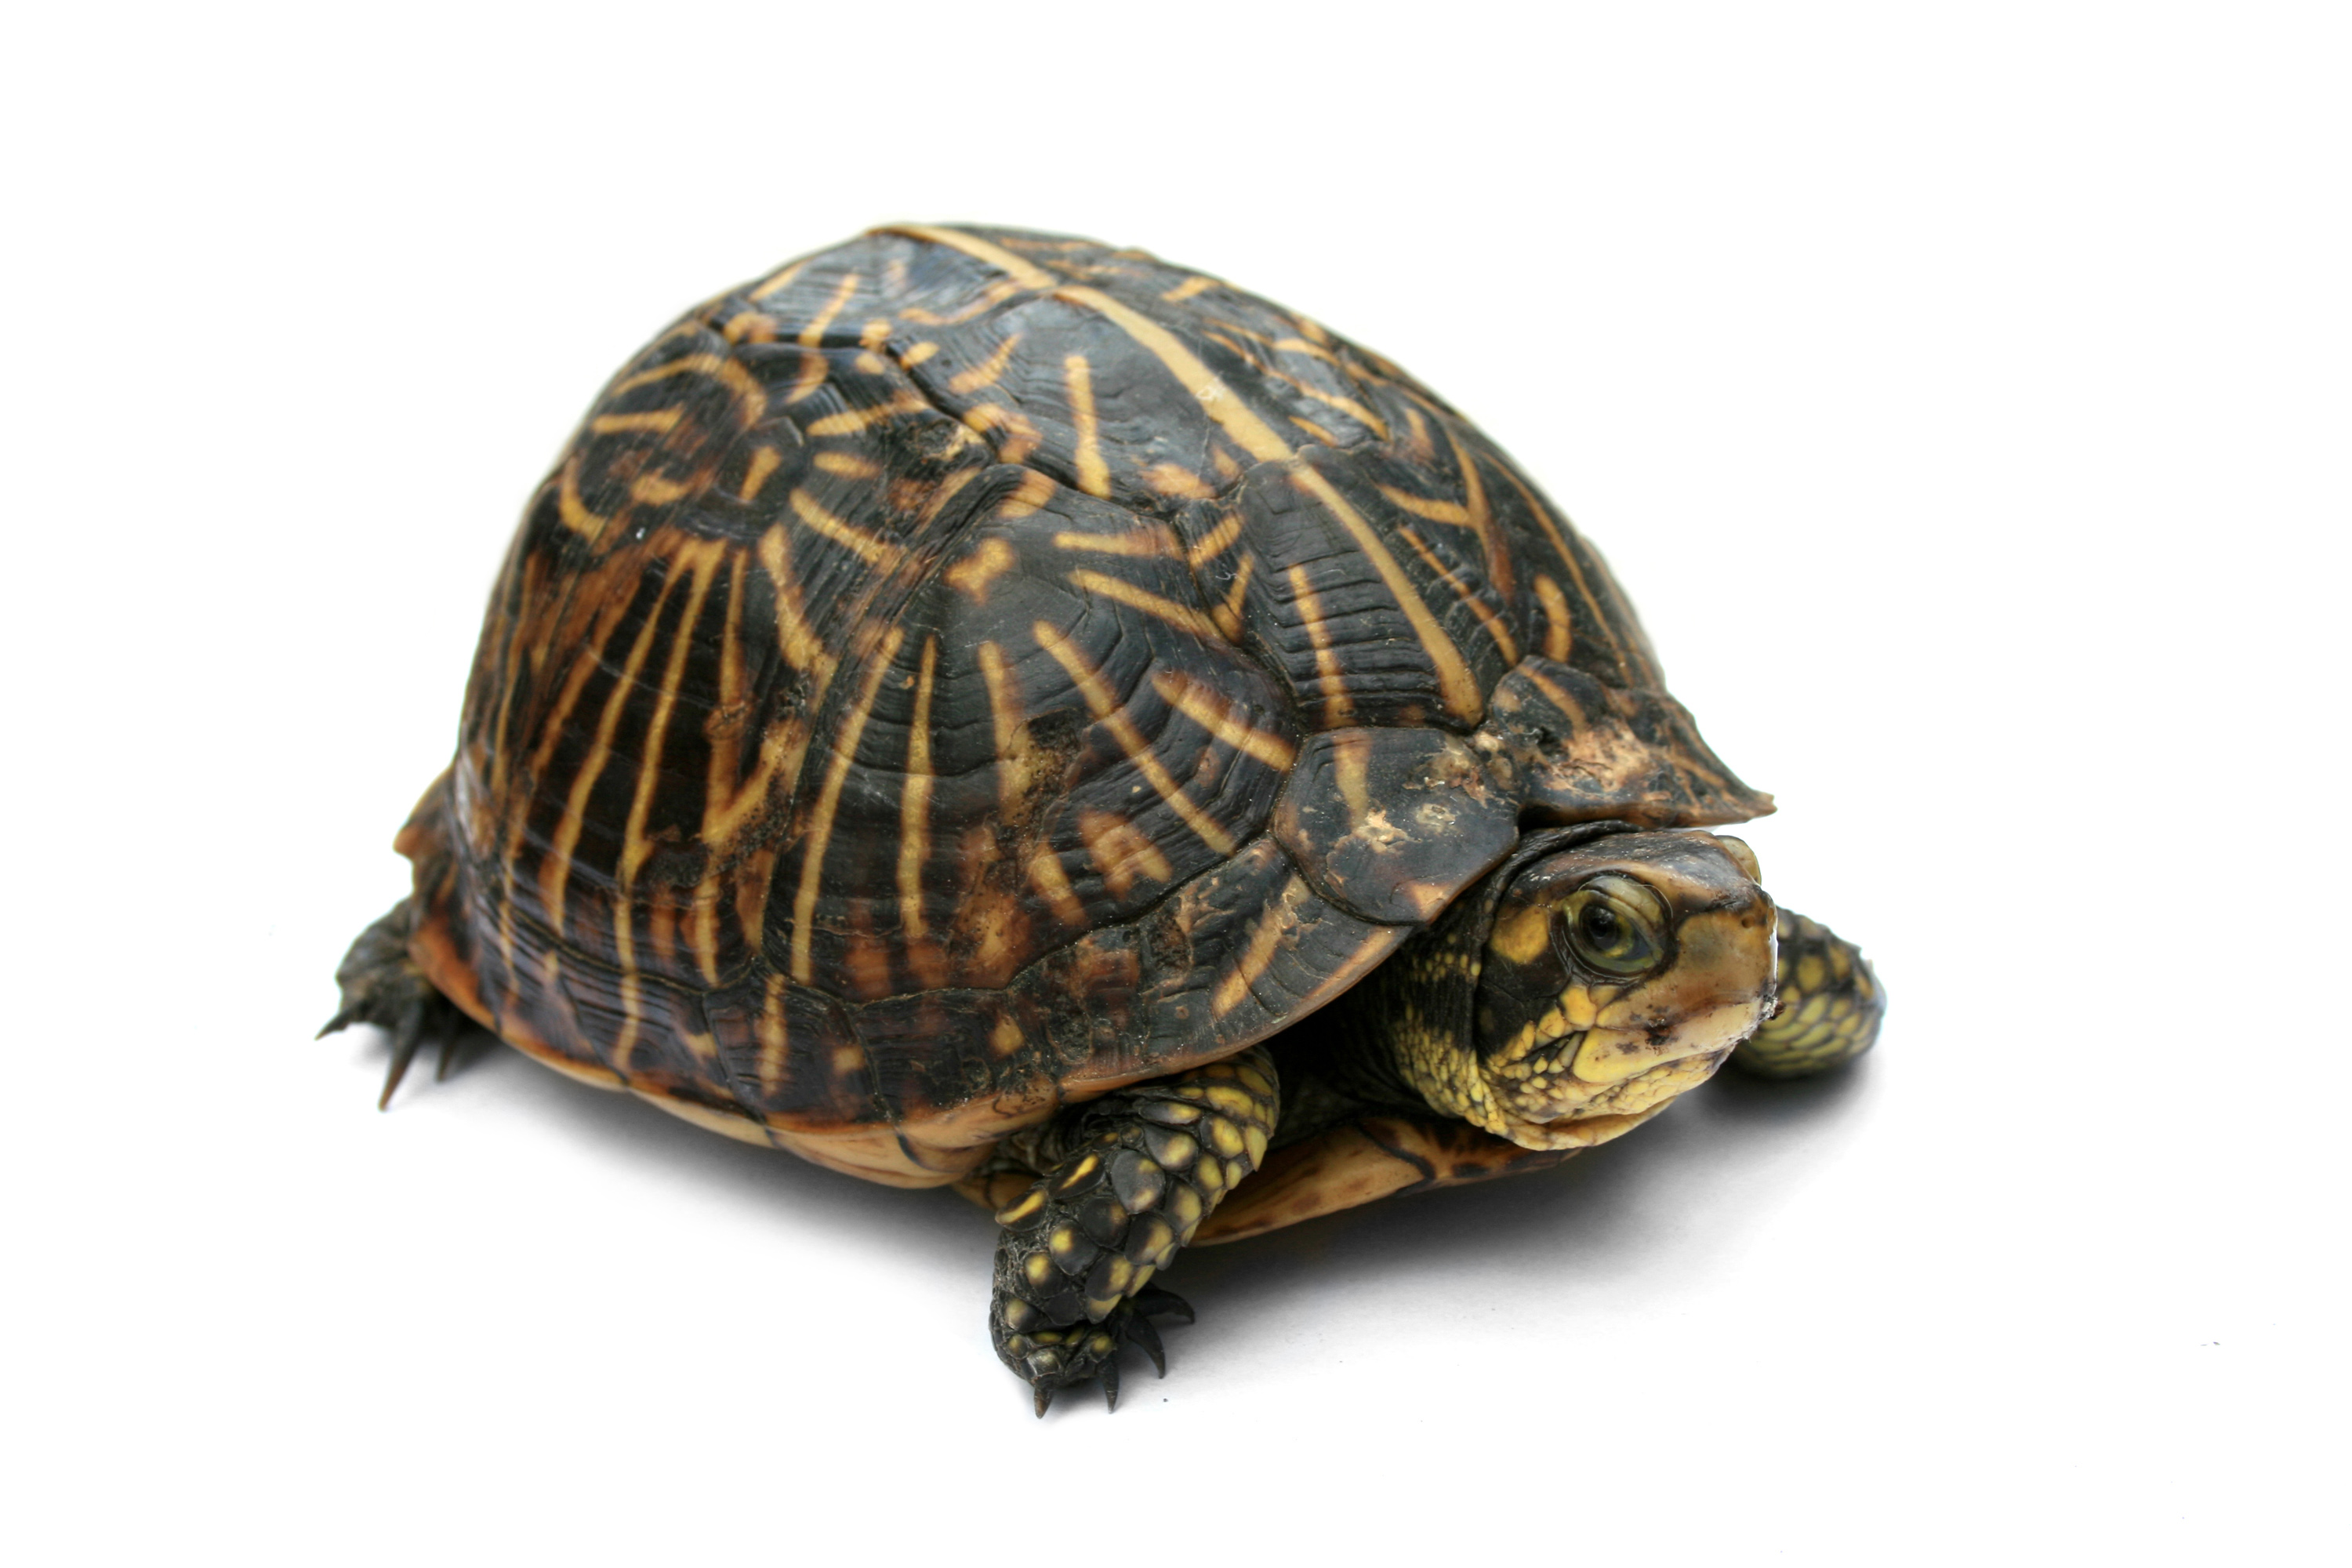 Amazing Turtle Pictures & Backgrounds